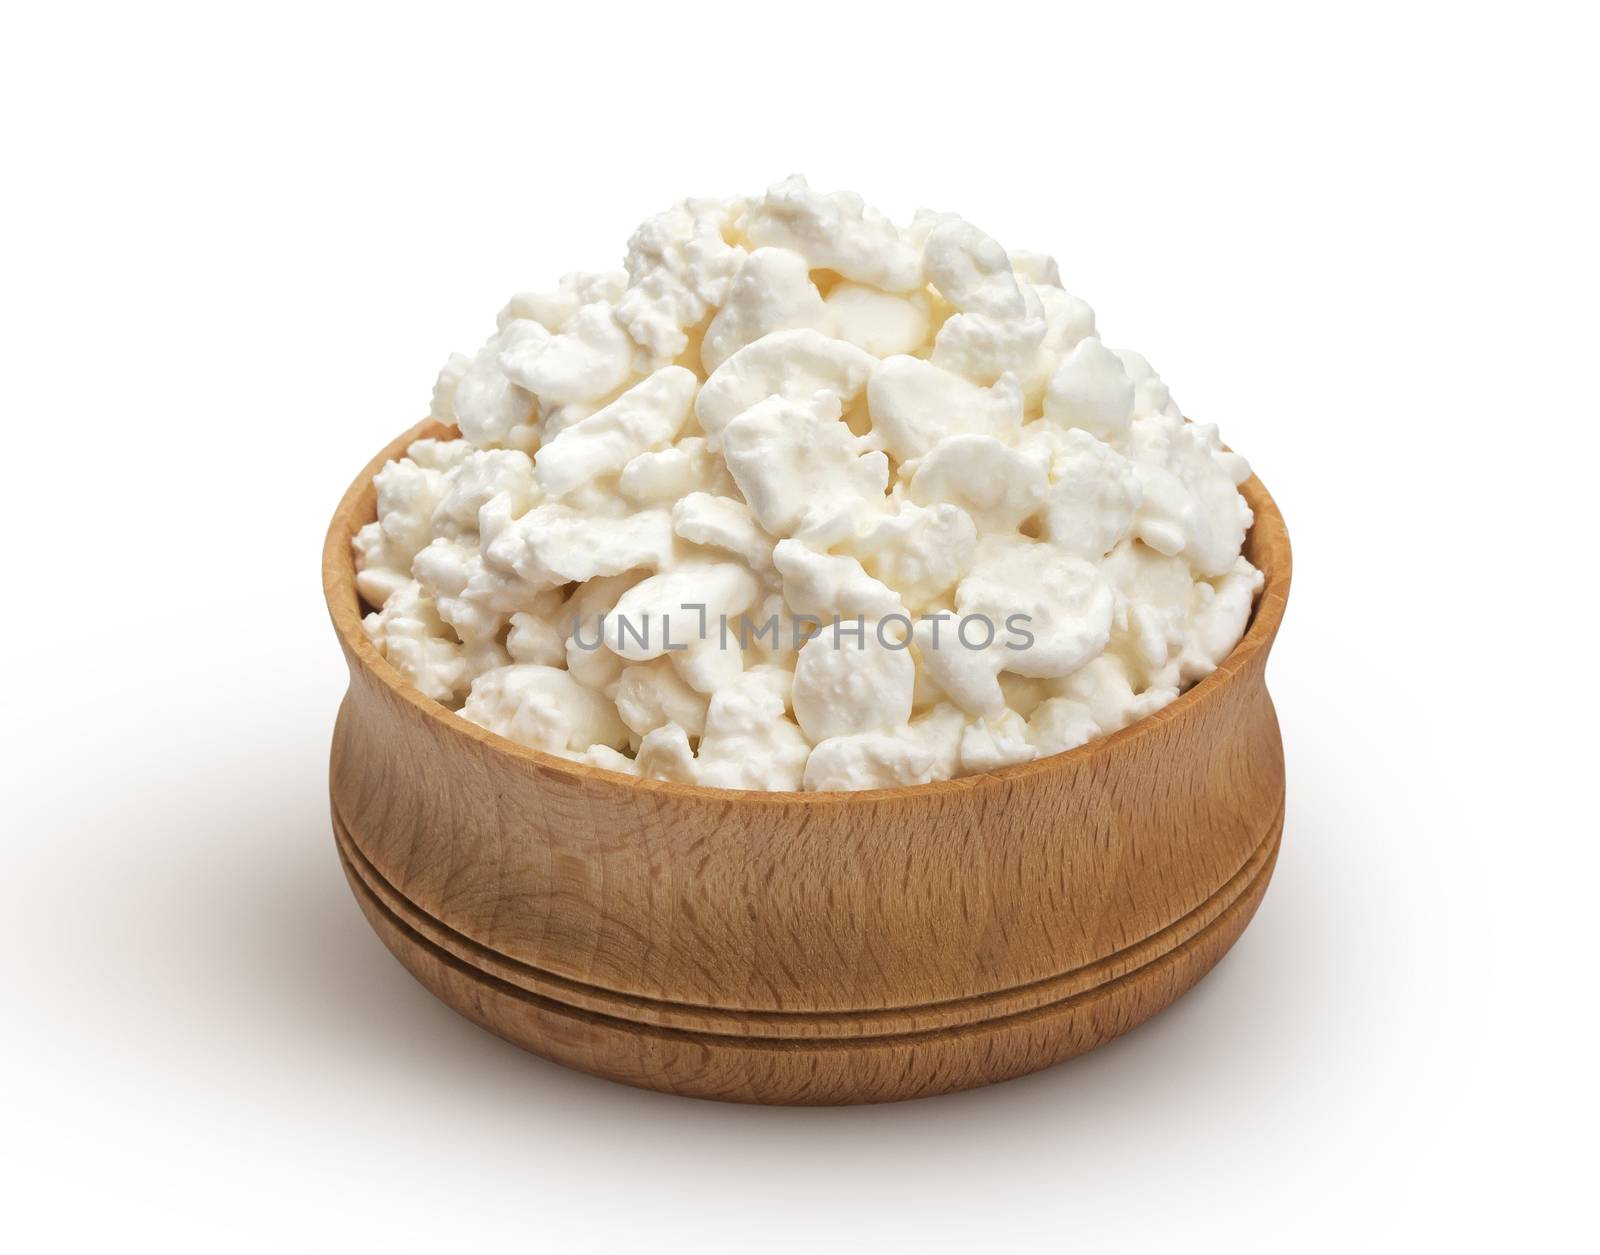 Cottage cheese in wooden bowl isolated on white background by xamtiw